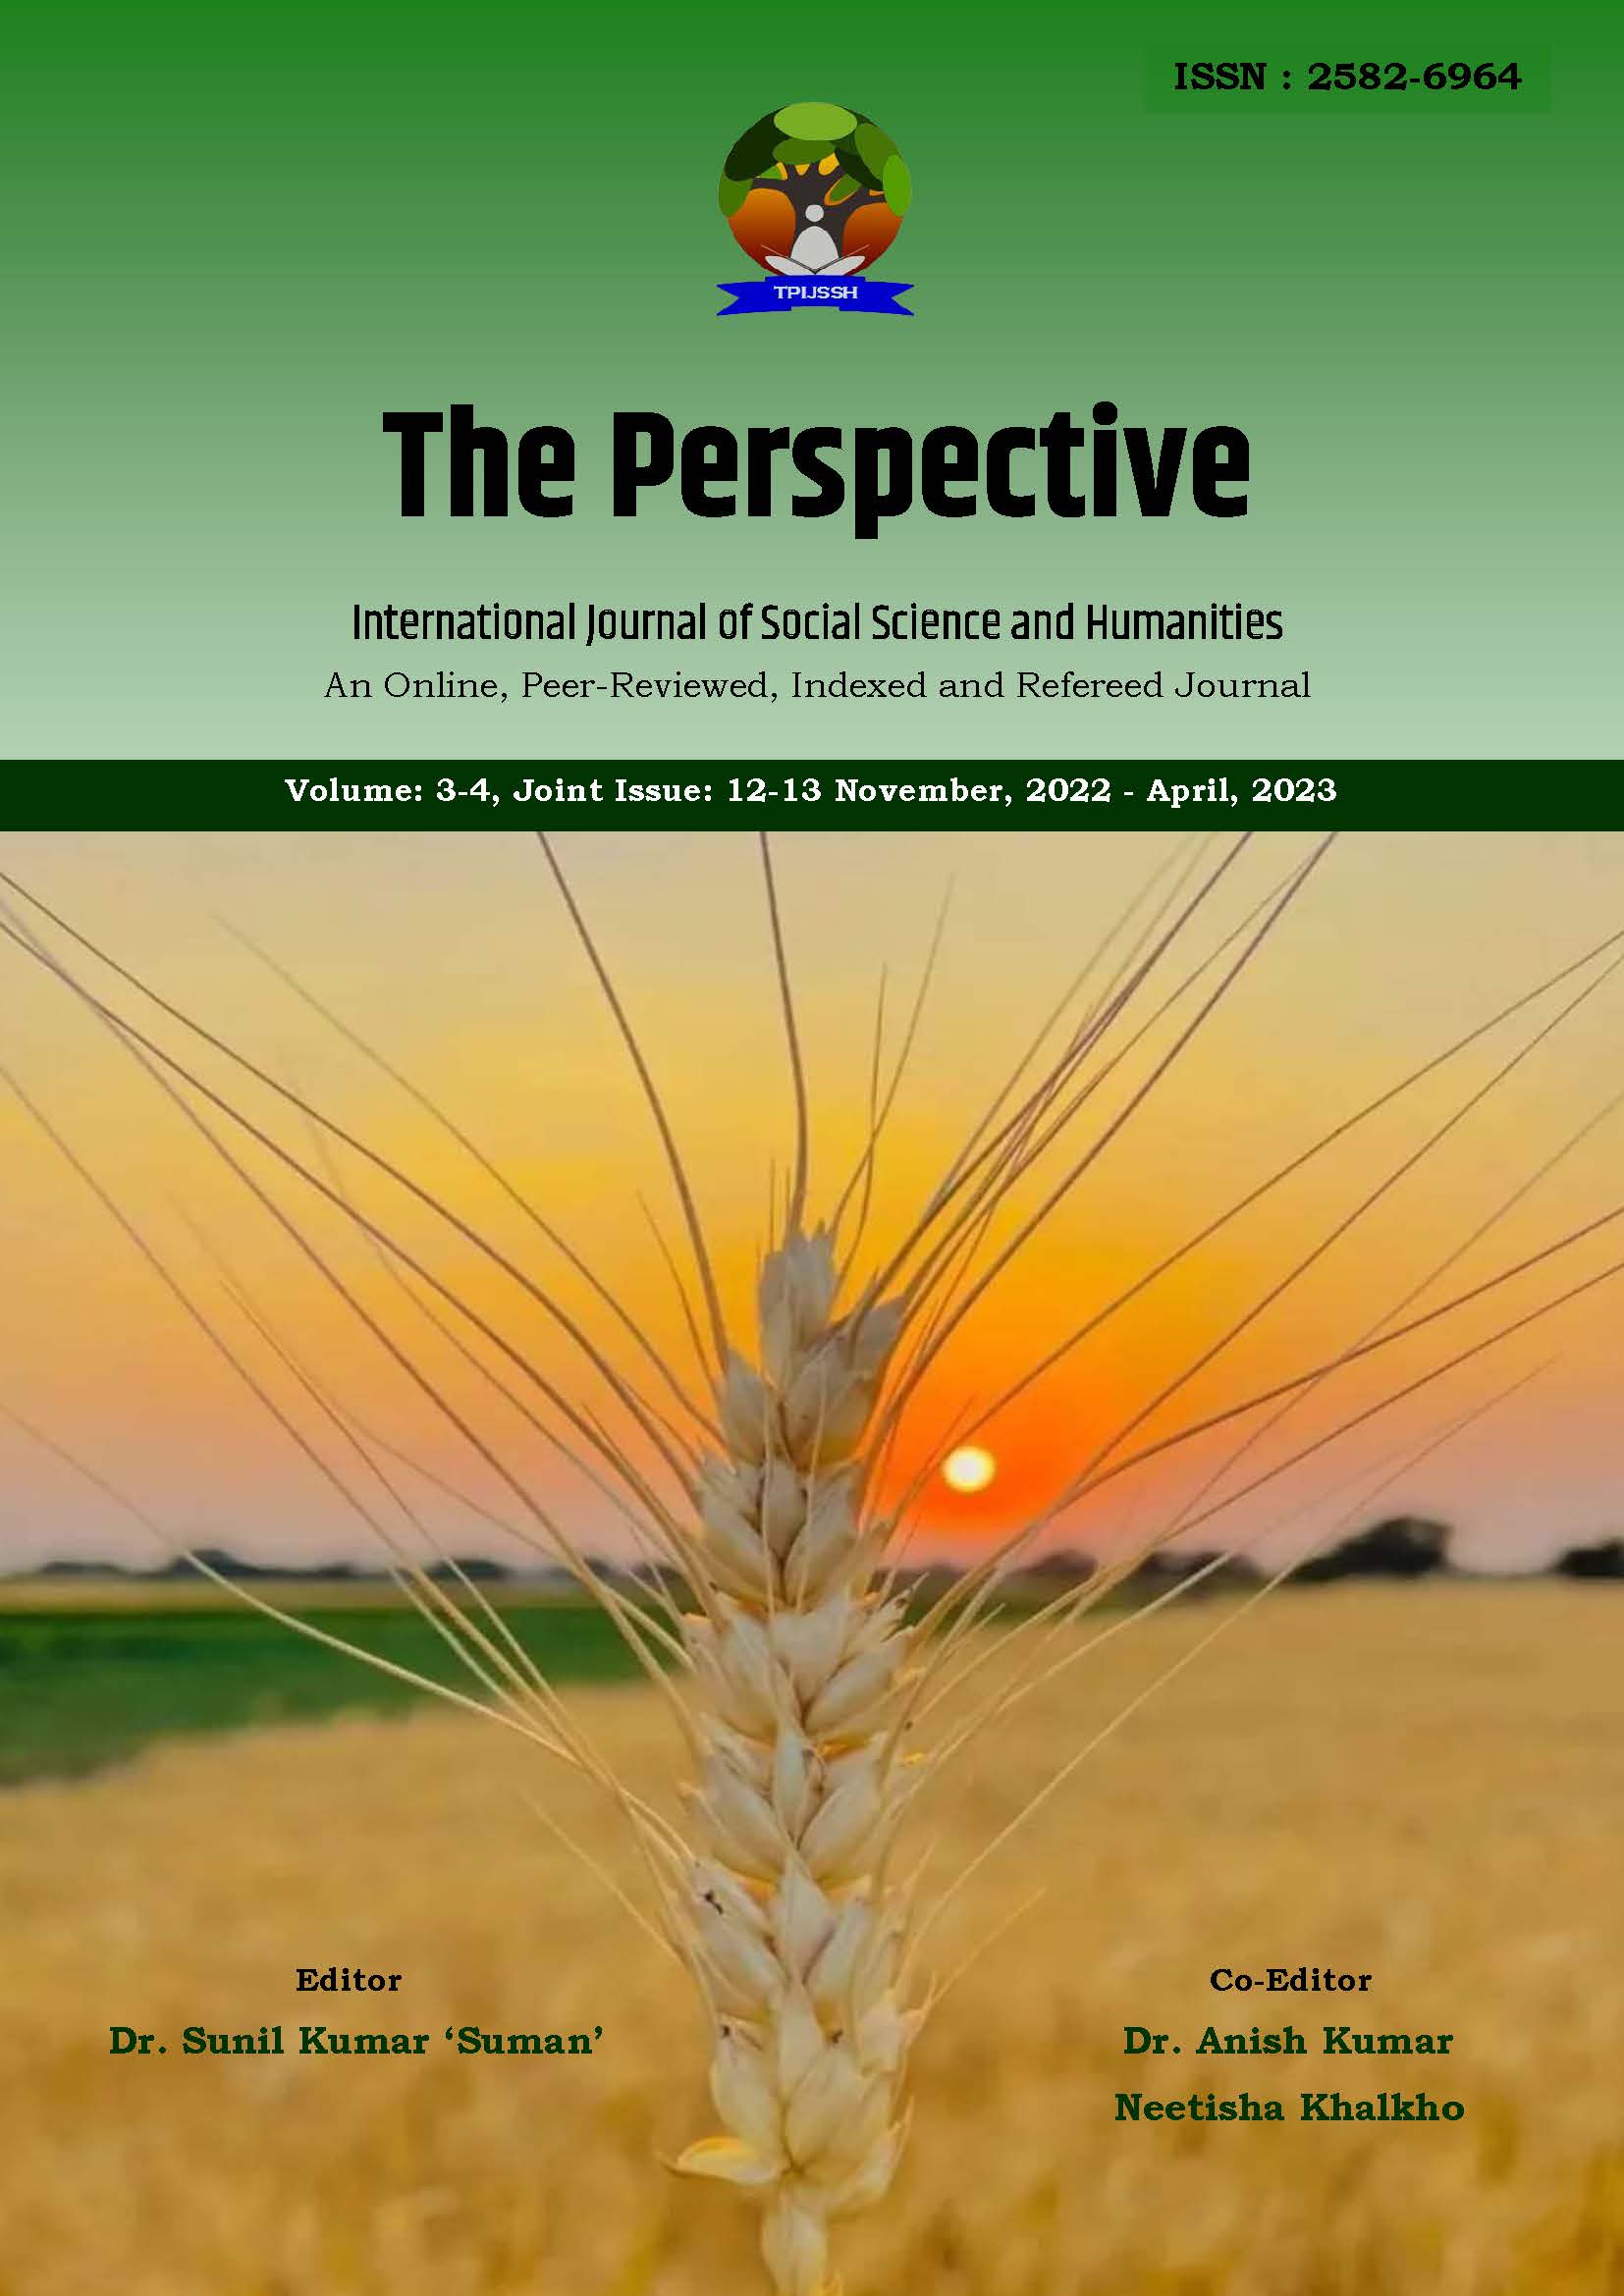 The Perspective International Journal of Social Science and Humanities Issue: 12-13